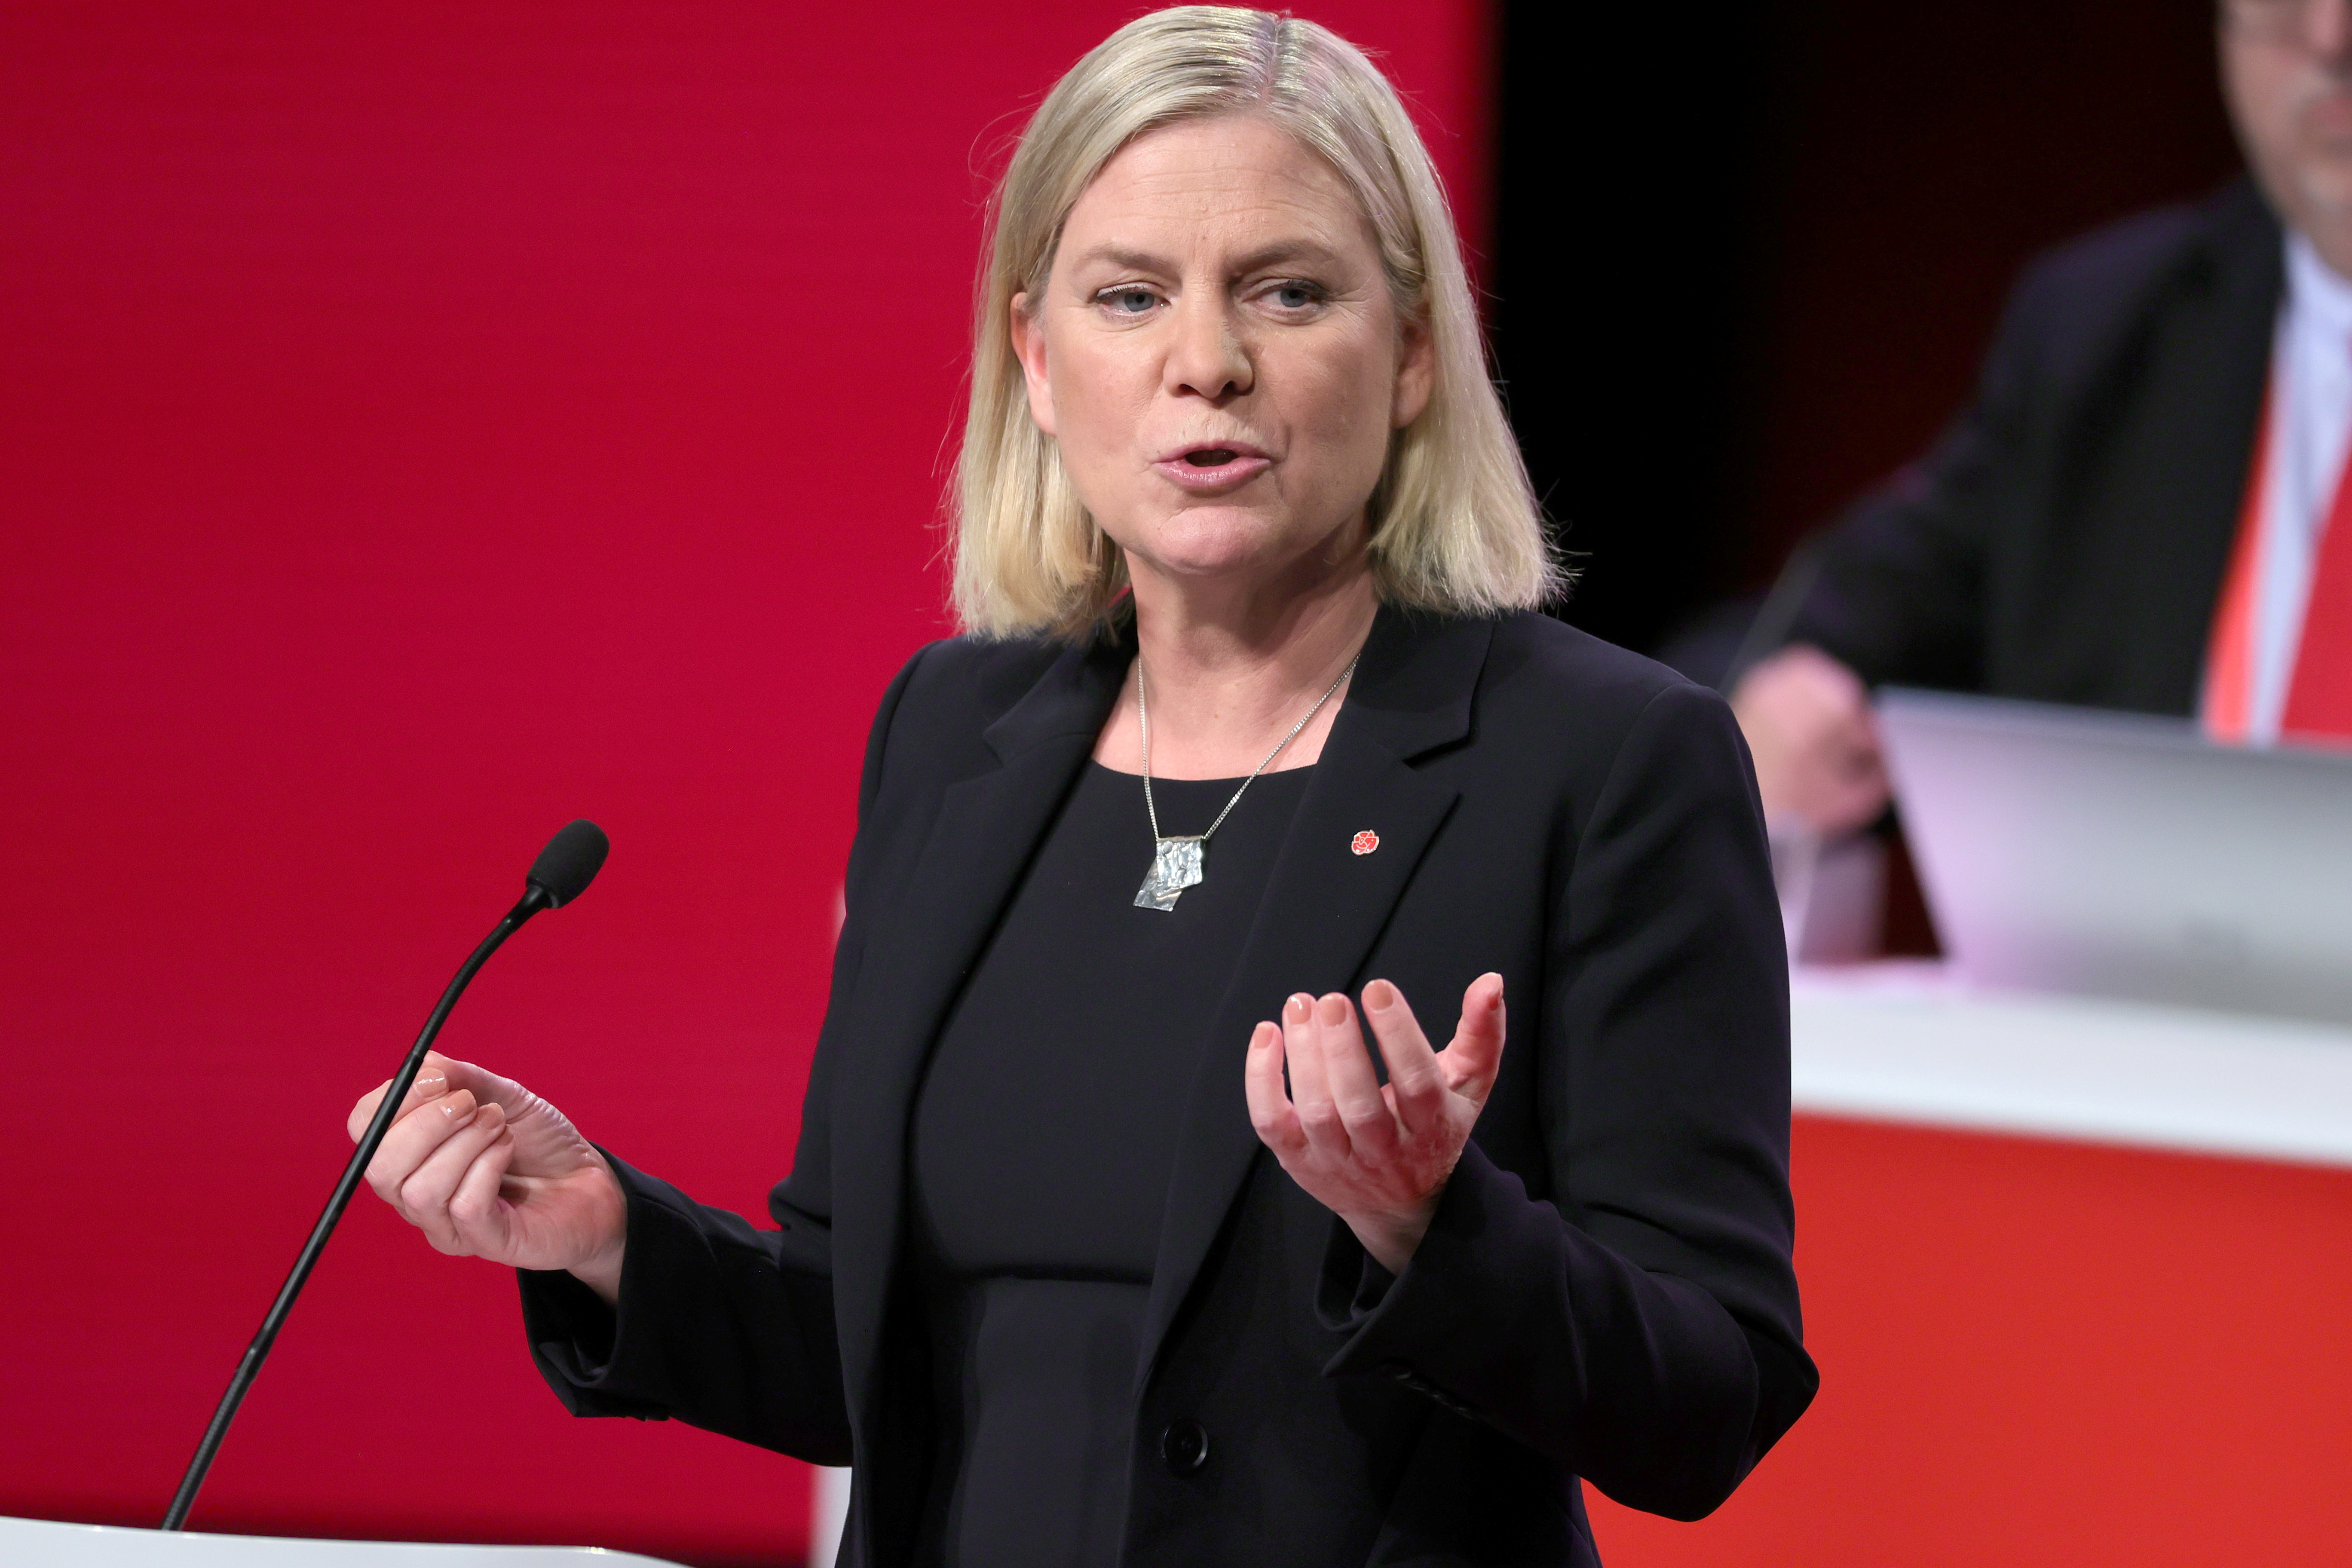 Sweden's Minister of Finance Magdalena Andersson delivers a speech after being elected as party leader of the Social Democratic Party at the party's congress in Gothenburg